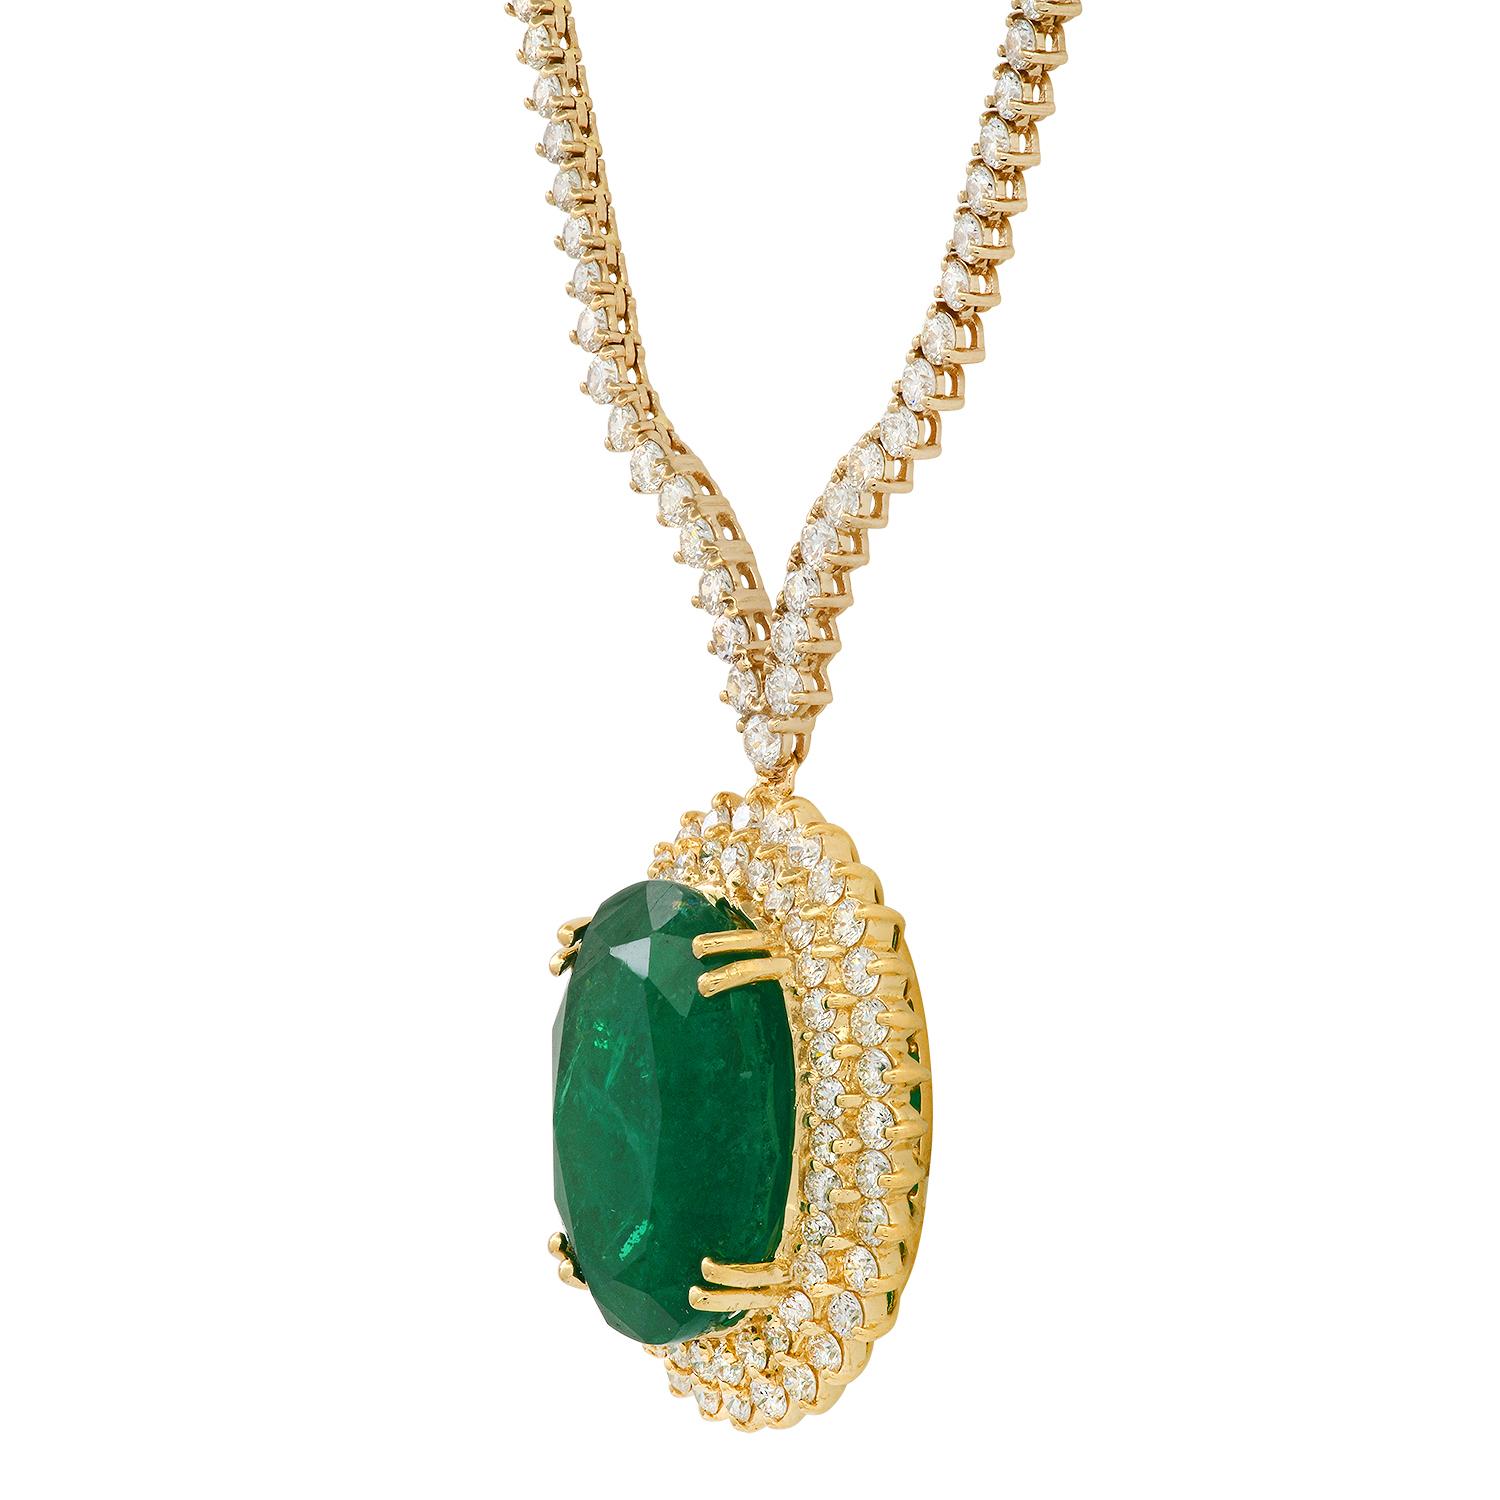 18K and 14K Yellow Gold Setting with 28.47ct Emerald and 7.97ct Diamond Necklace